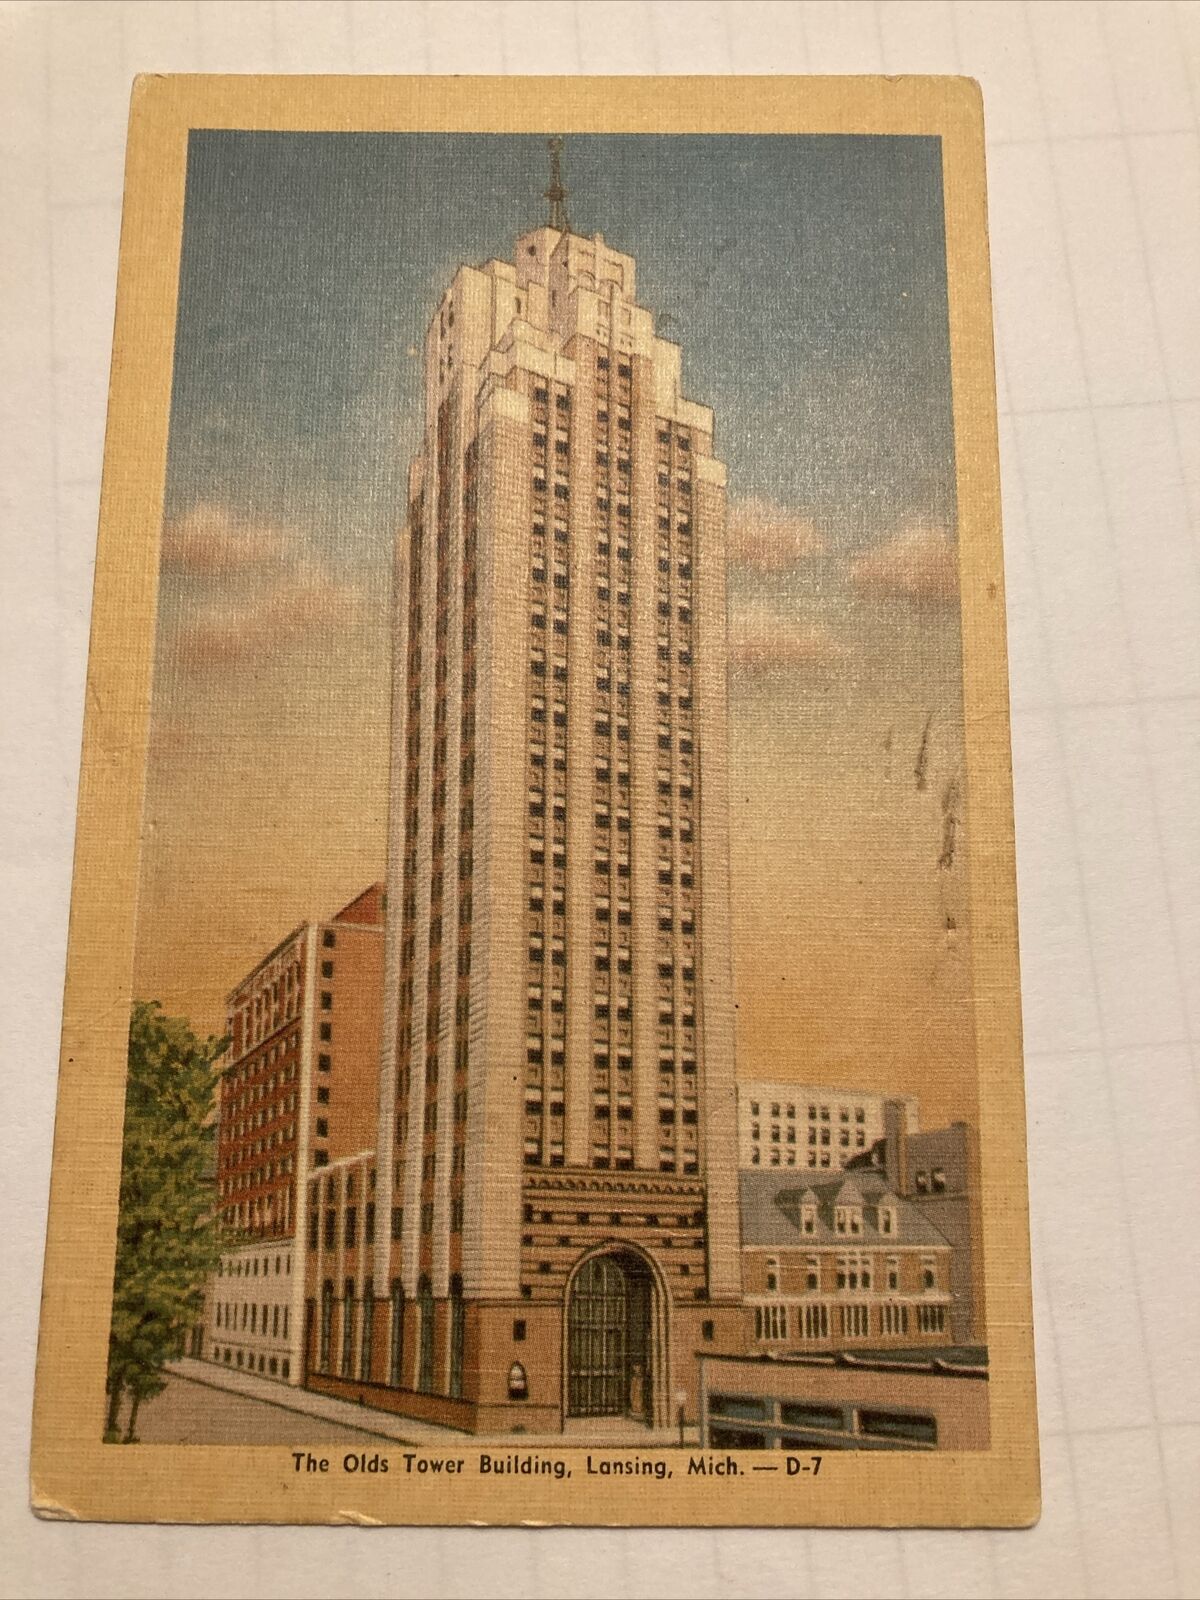 The Olds Tower Building, Lansing, Michigan - Postcard